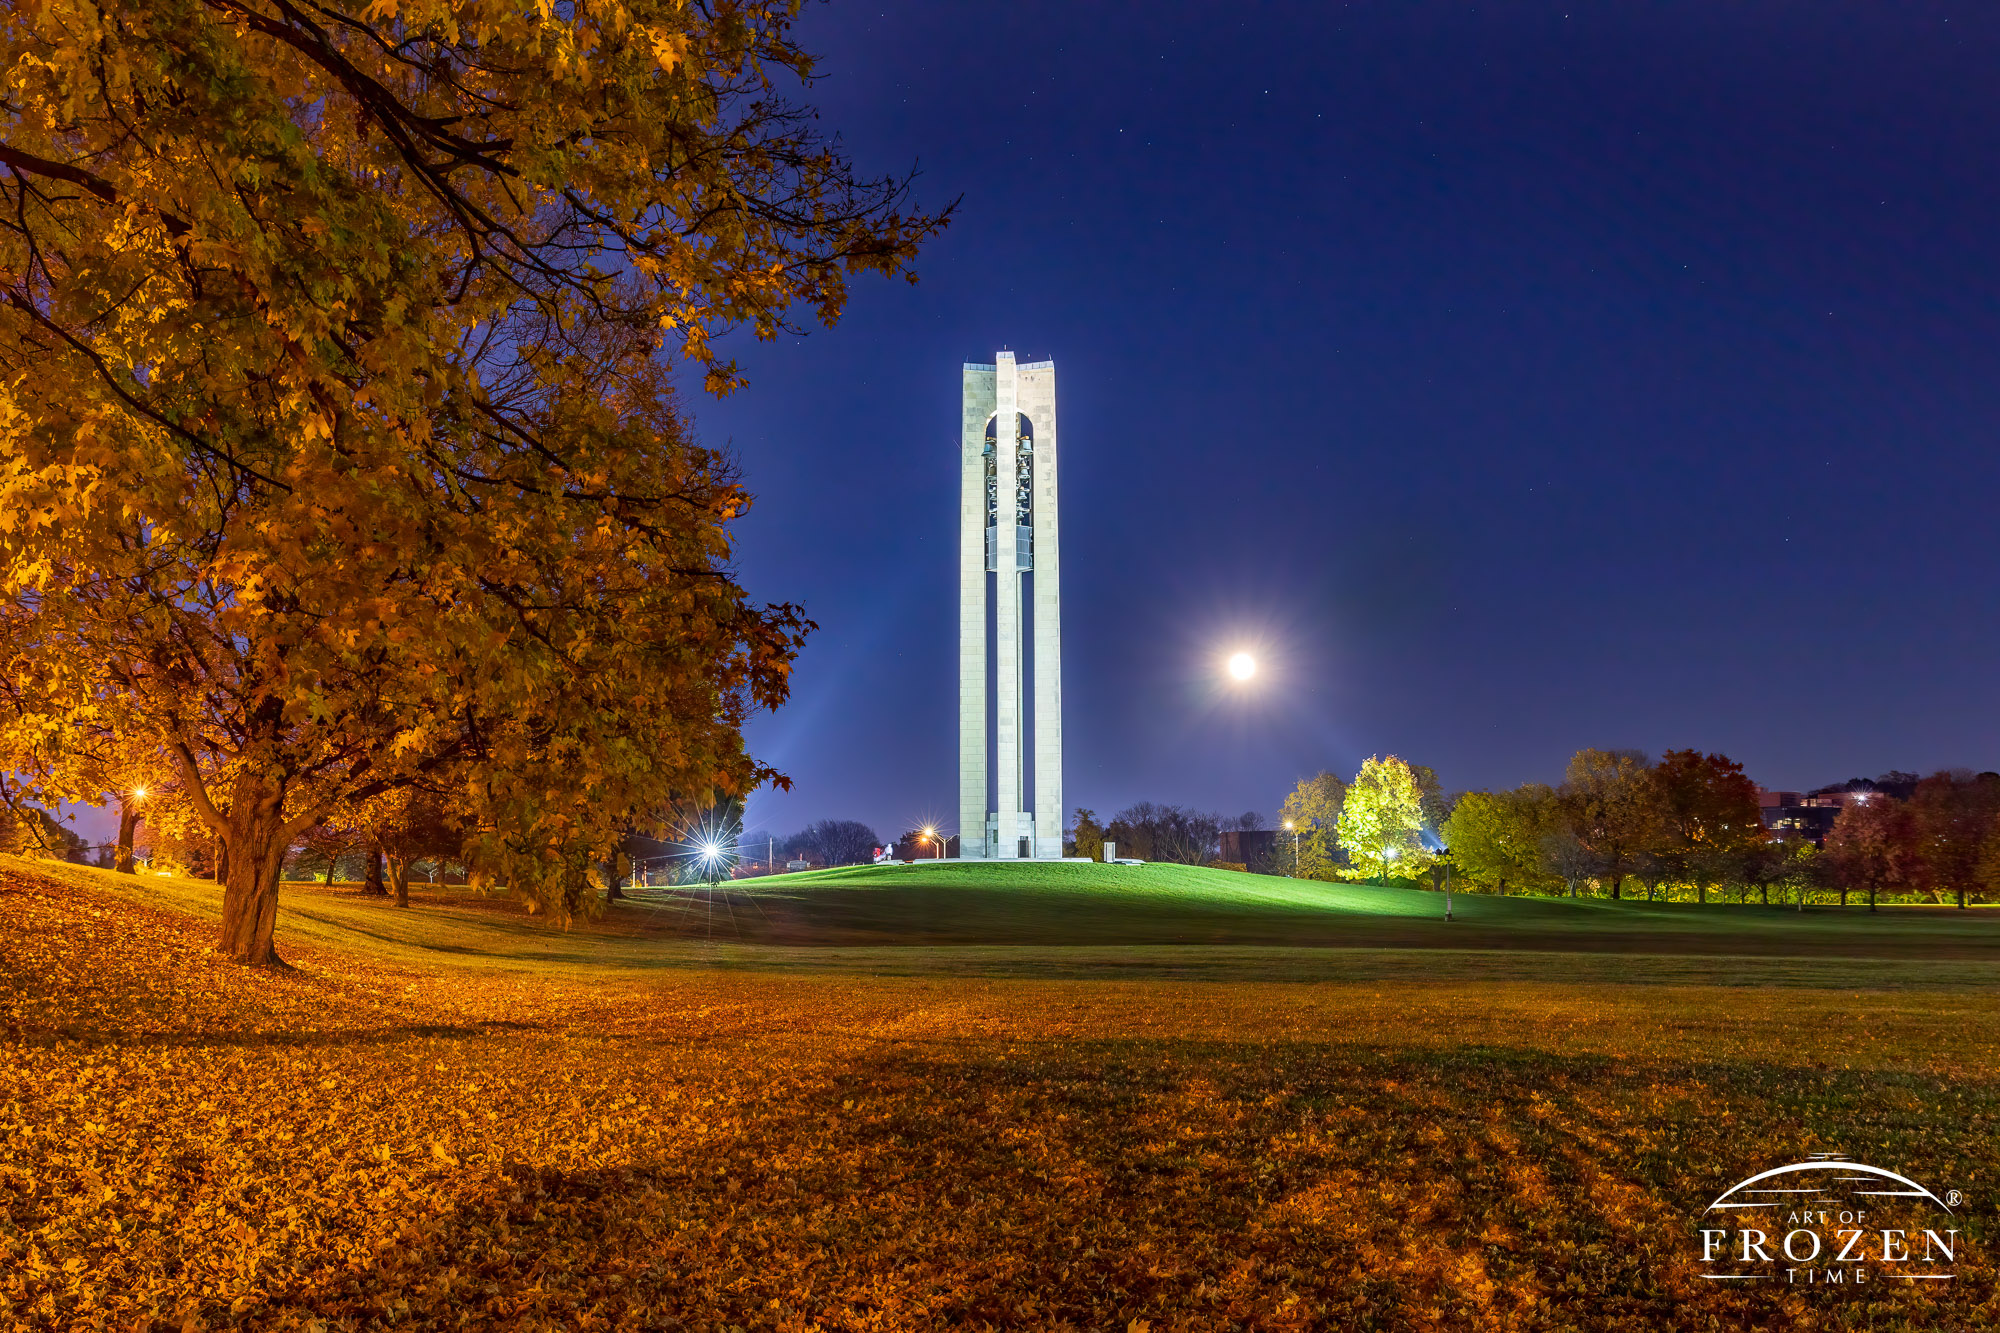 A full moon rising next to Dayton’s bell tower on an autumn evening which coincides with Halloween.